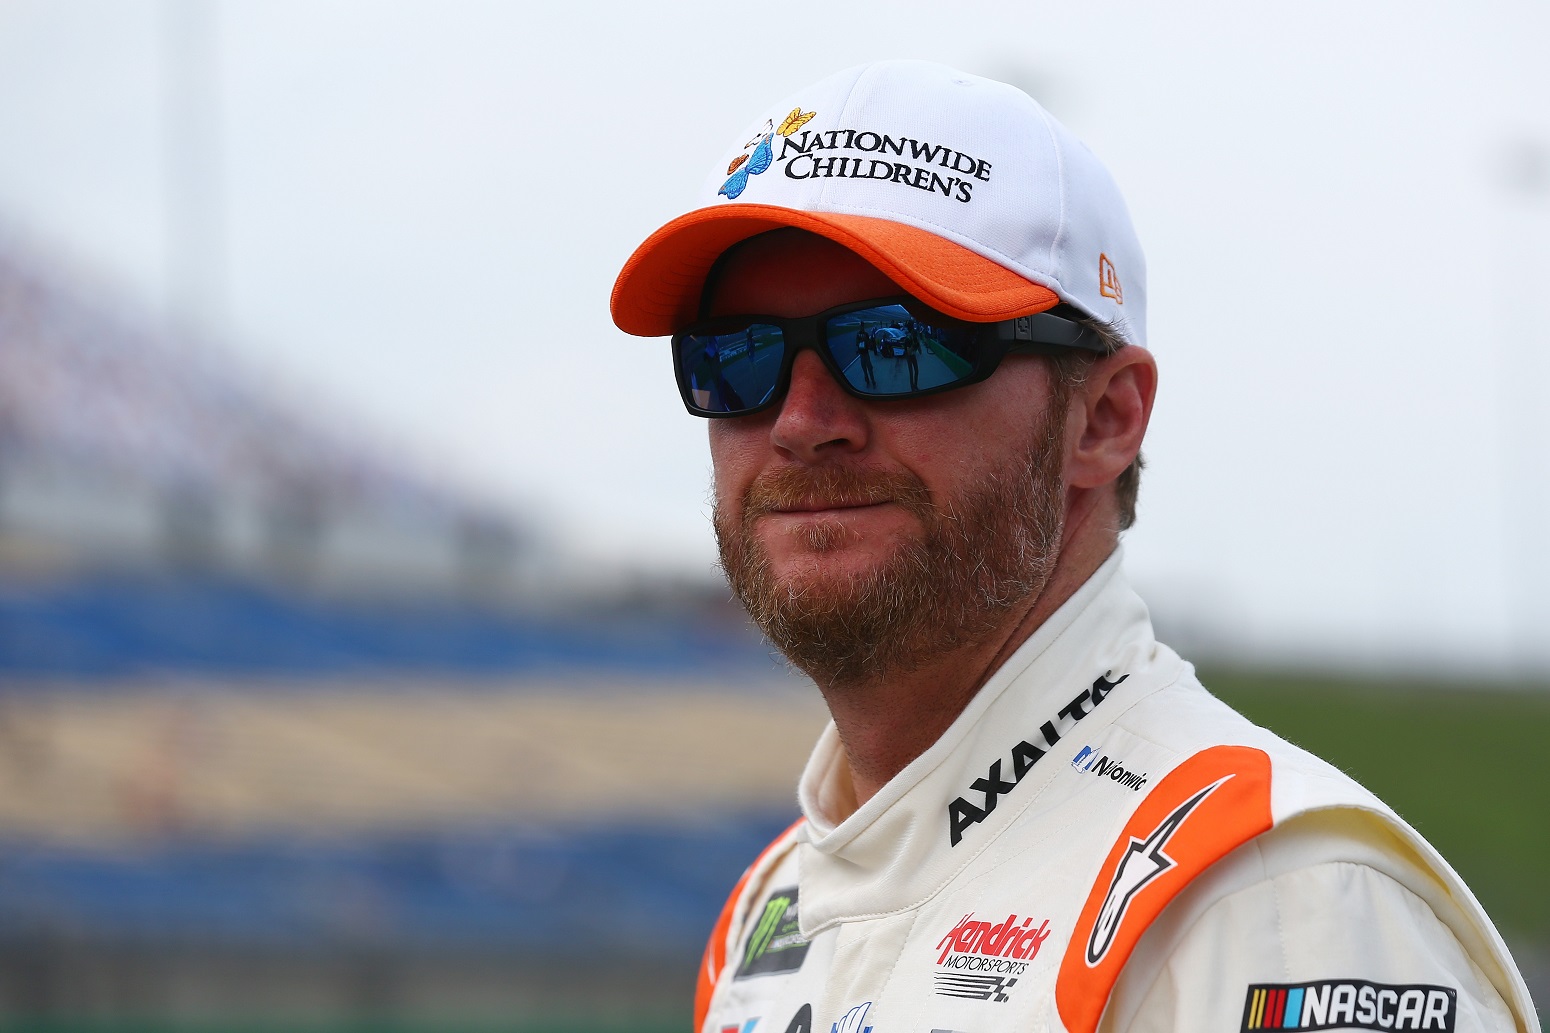 Dale Earnhardt Jr.’s Mom’s Death Scared Him About His Life: ‘It Really Messed Me Up’